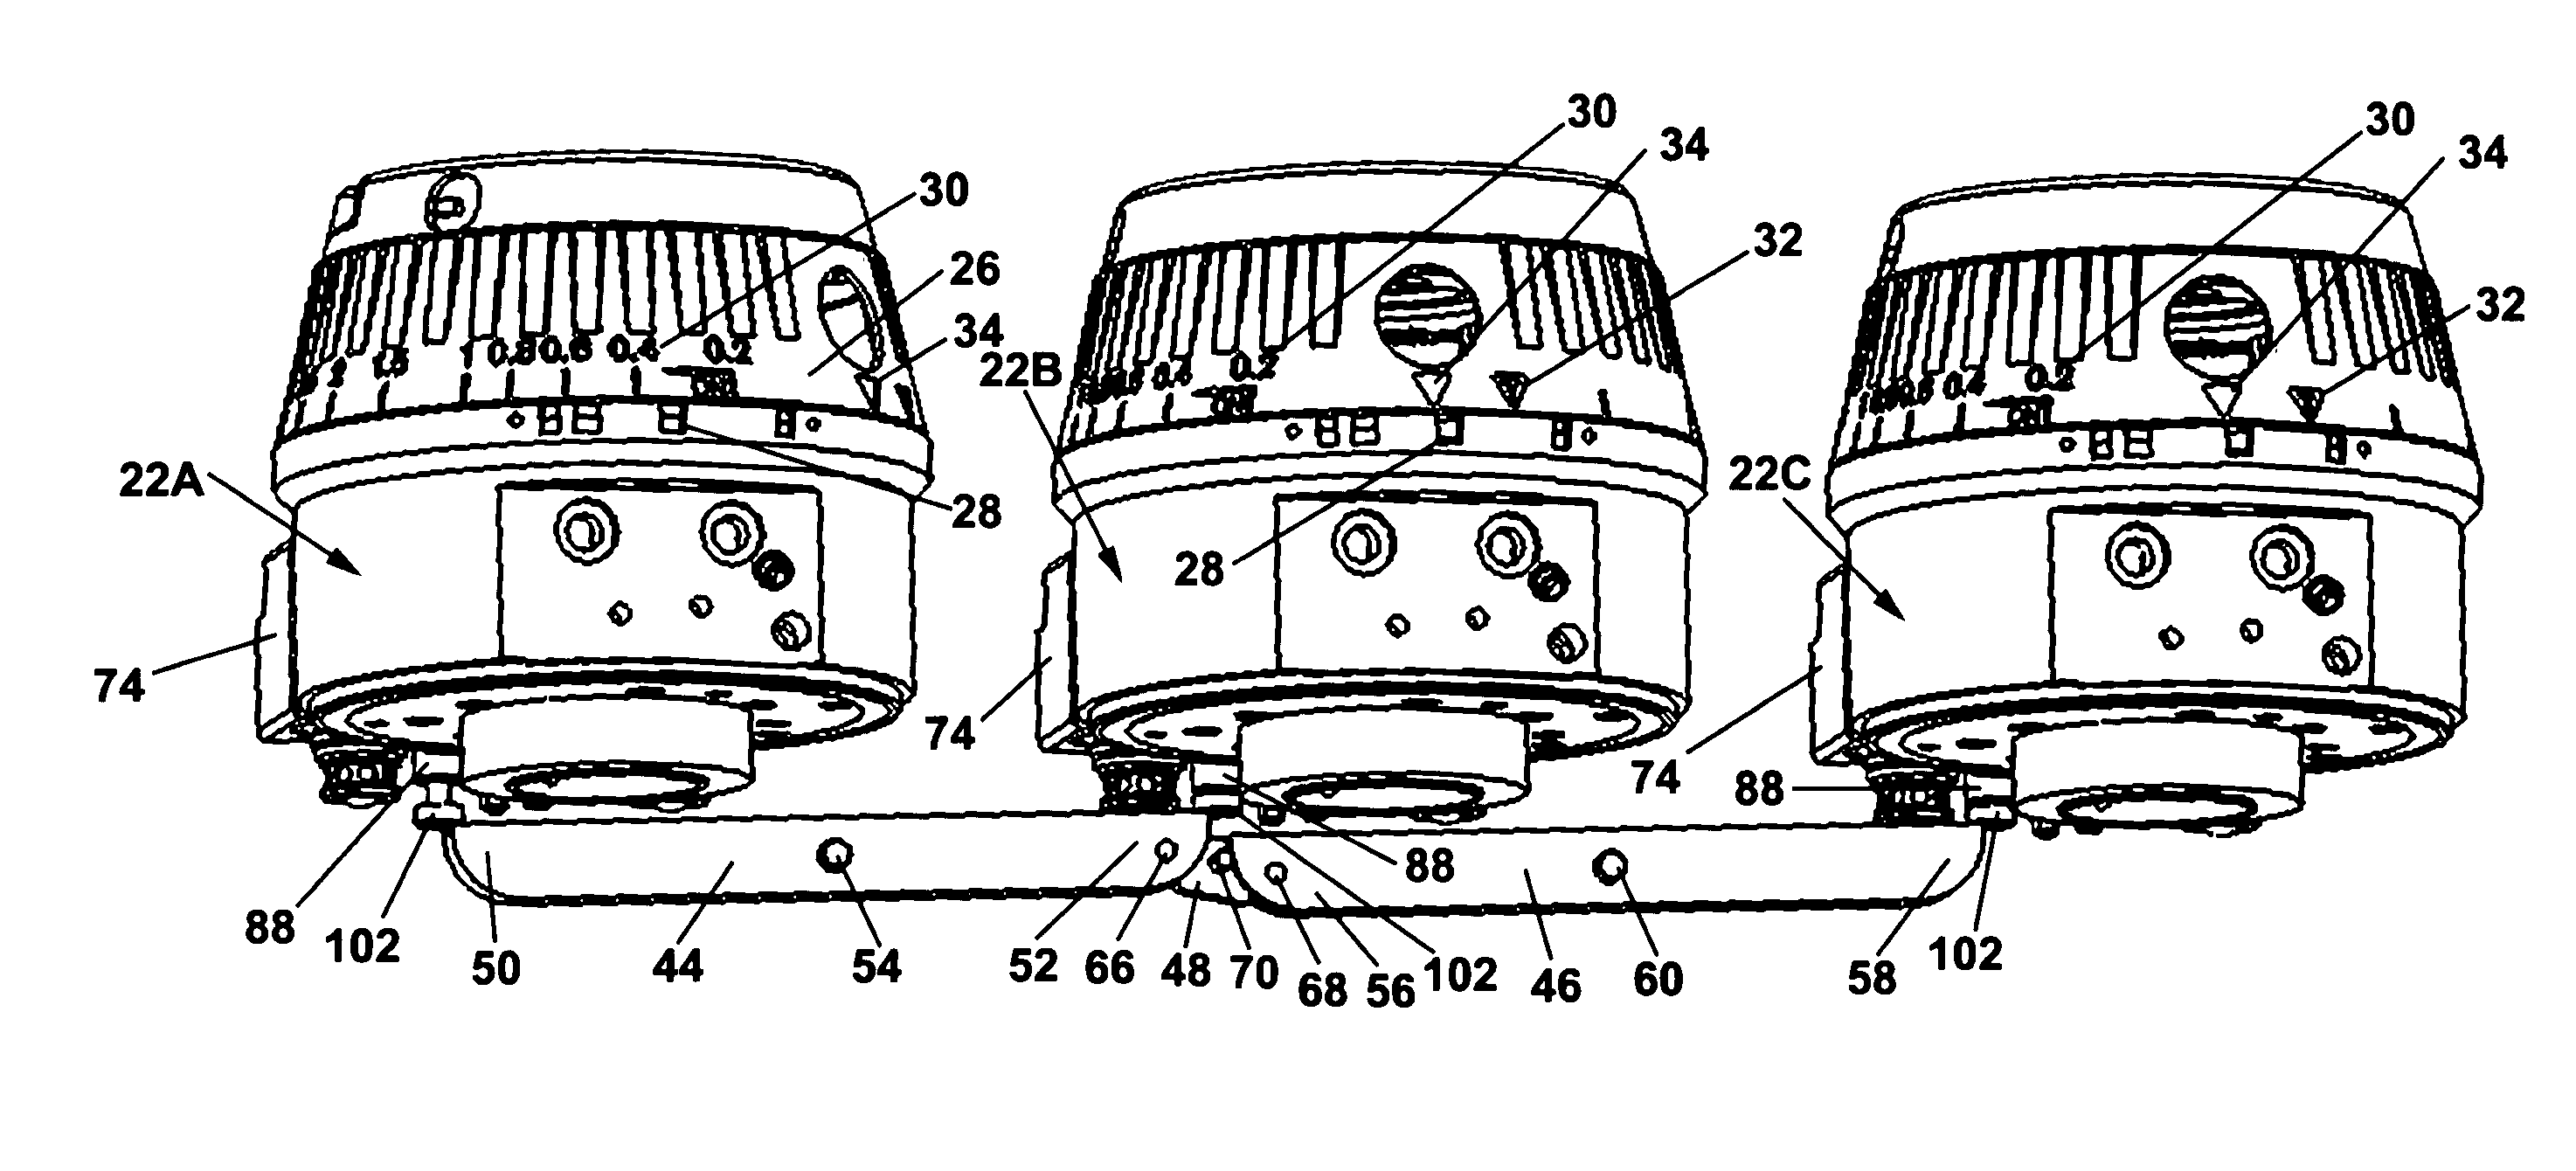 Interlock/exclusion systems for multiple vaporizer anesthesia machines